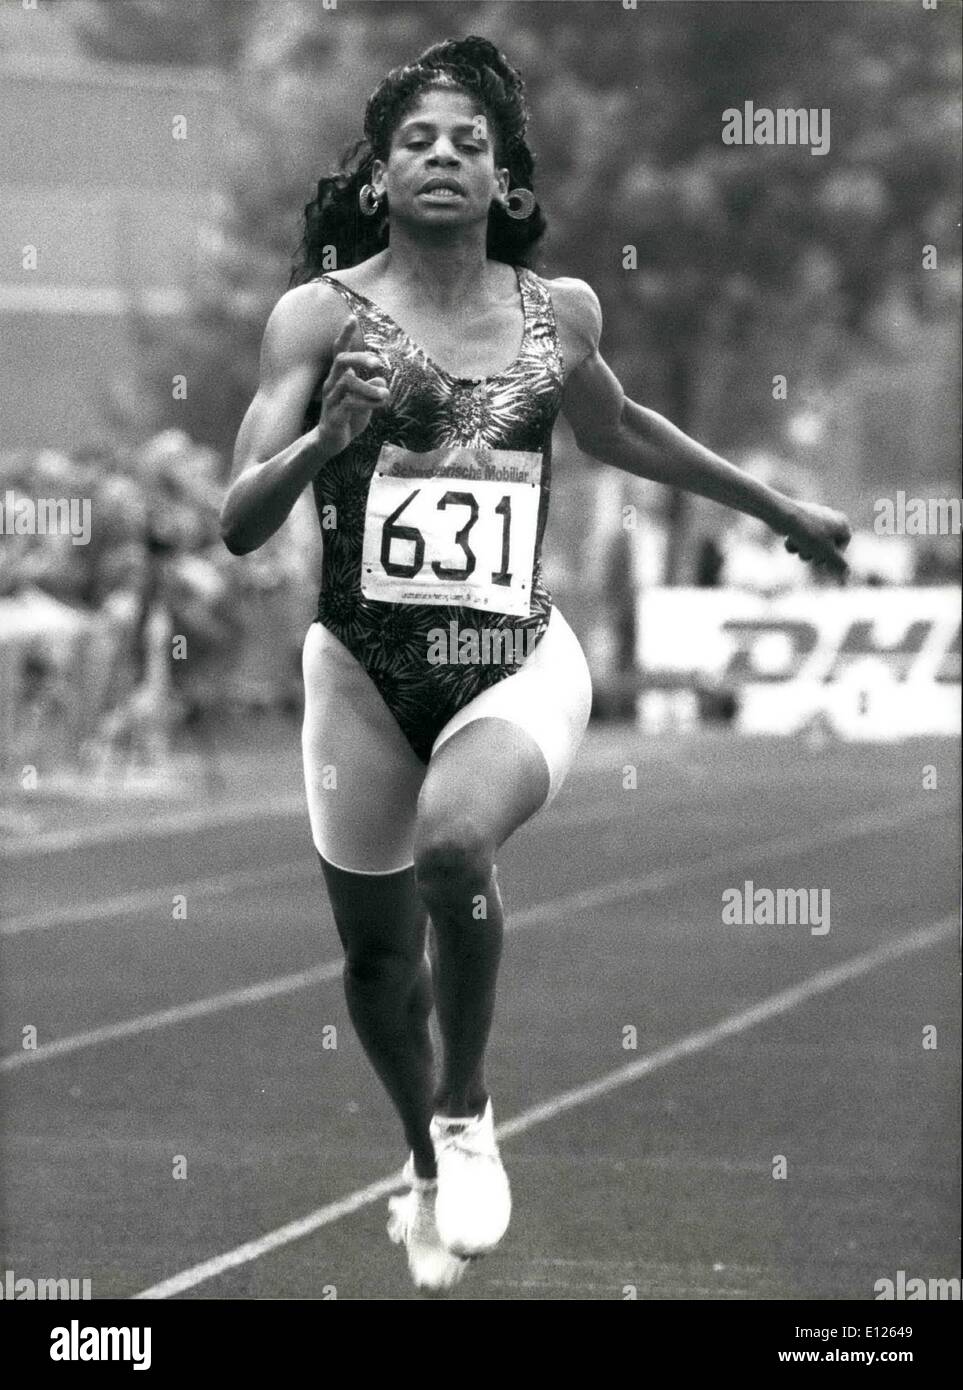 Jun. 06, 1989 - New sprint talent Dawn Sorell from USA was the big star at a track and field meeting in Lucerne, taking place there June 24. Picture shows Dawn Sorell in action during 100 m sprint, which she won in 11,05 seconds. Stock Photo